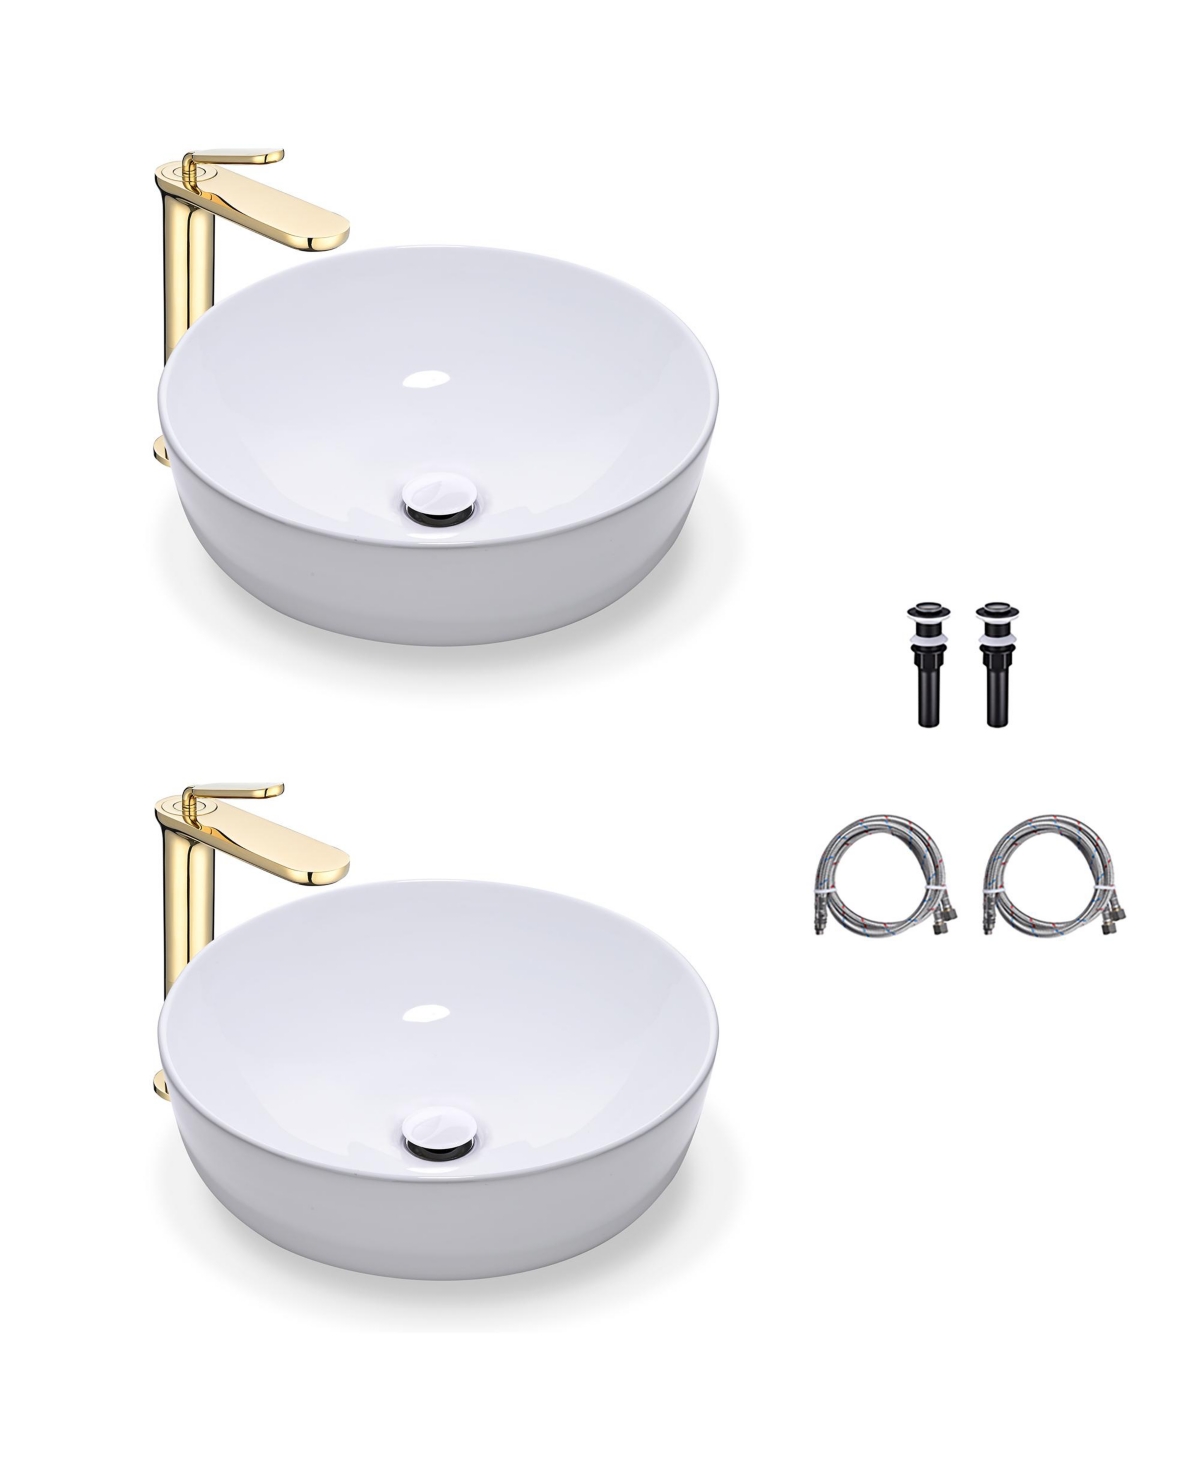 Round Ceramic Vessel Sink with Single Handle Faucet Drain Set of 2 - Natural